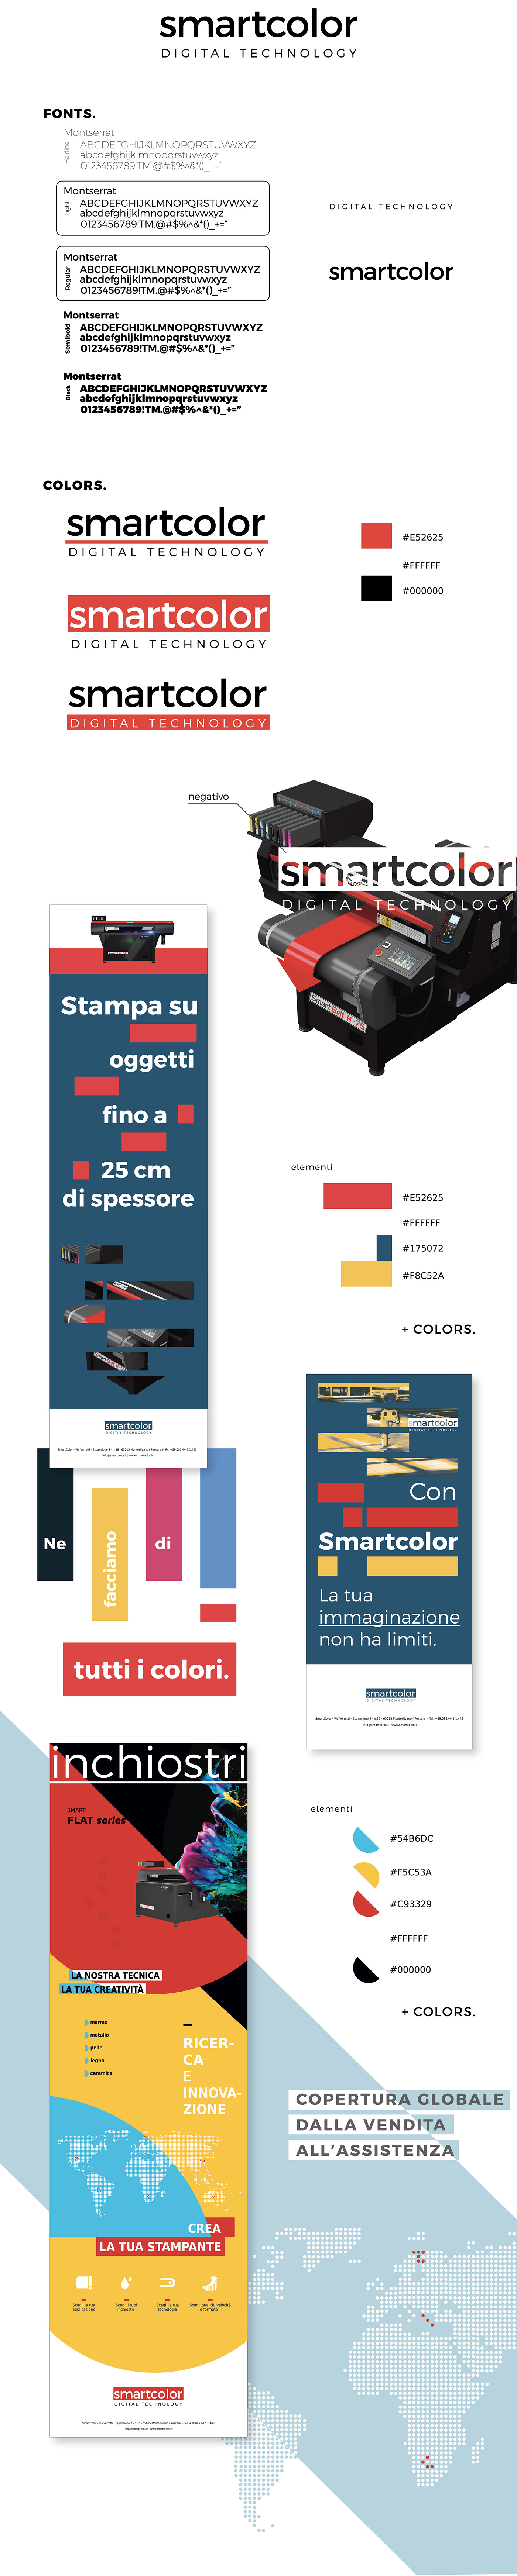 stampa plotter tecnologia visual siteweb corporate graphic shapes Claim payoff